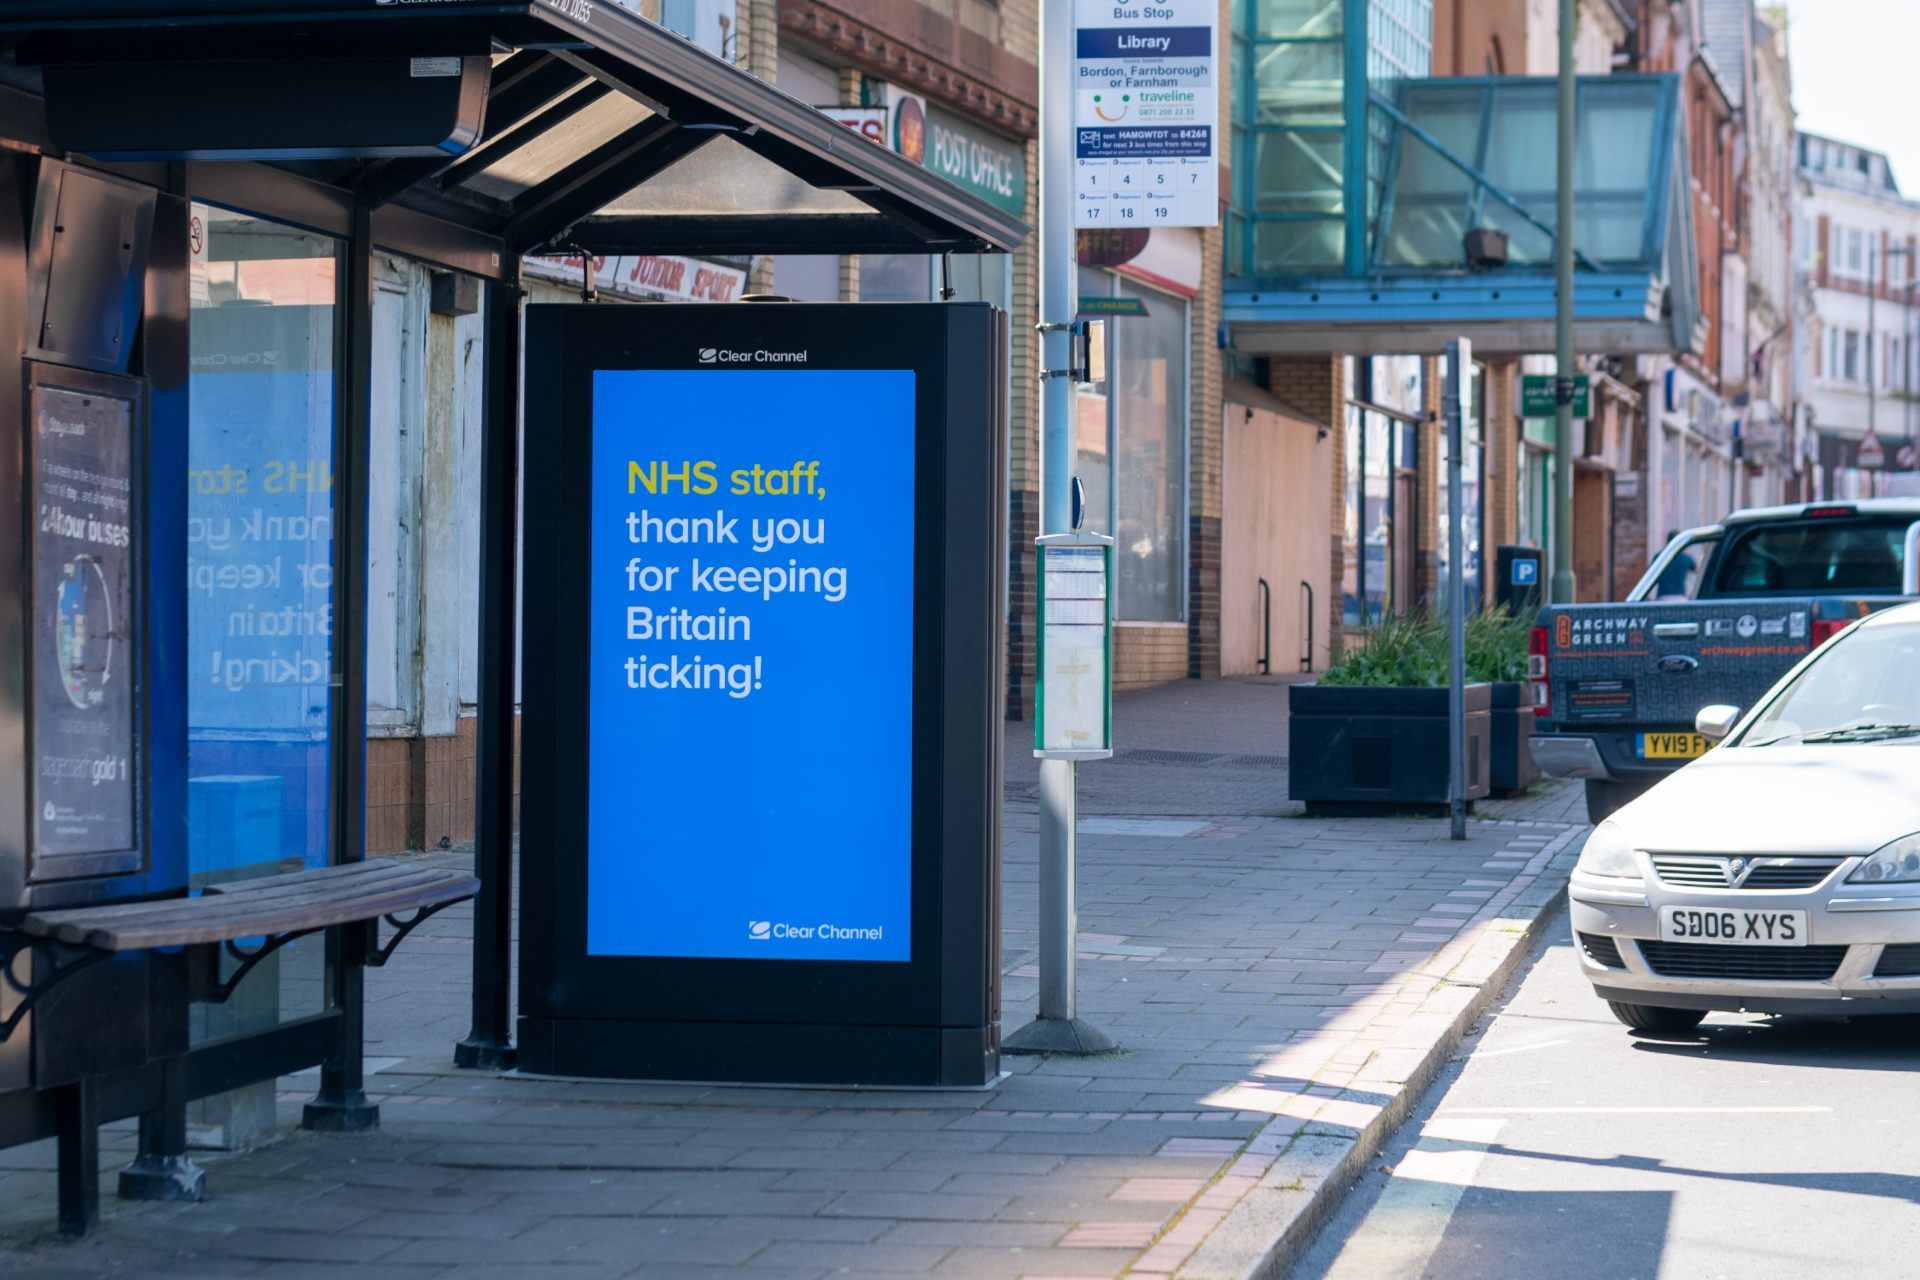 A sign on a bus stop in the UK is a thank-you message to NHS workers